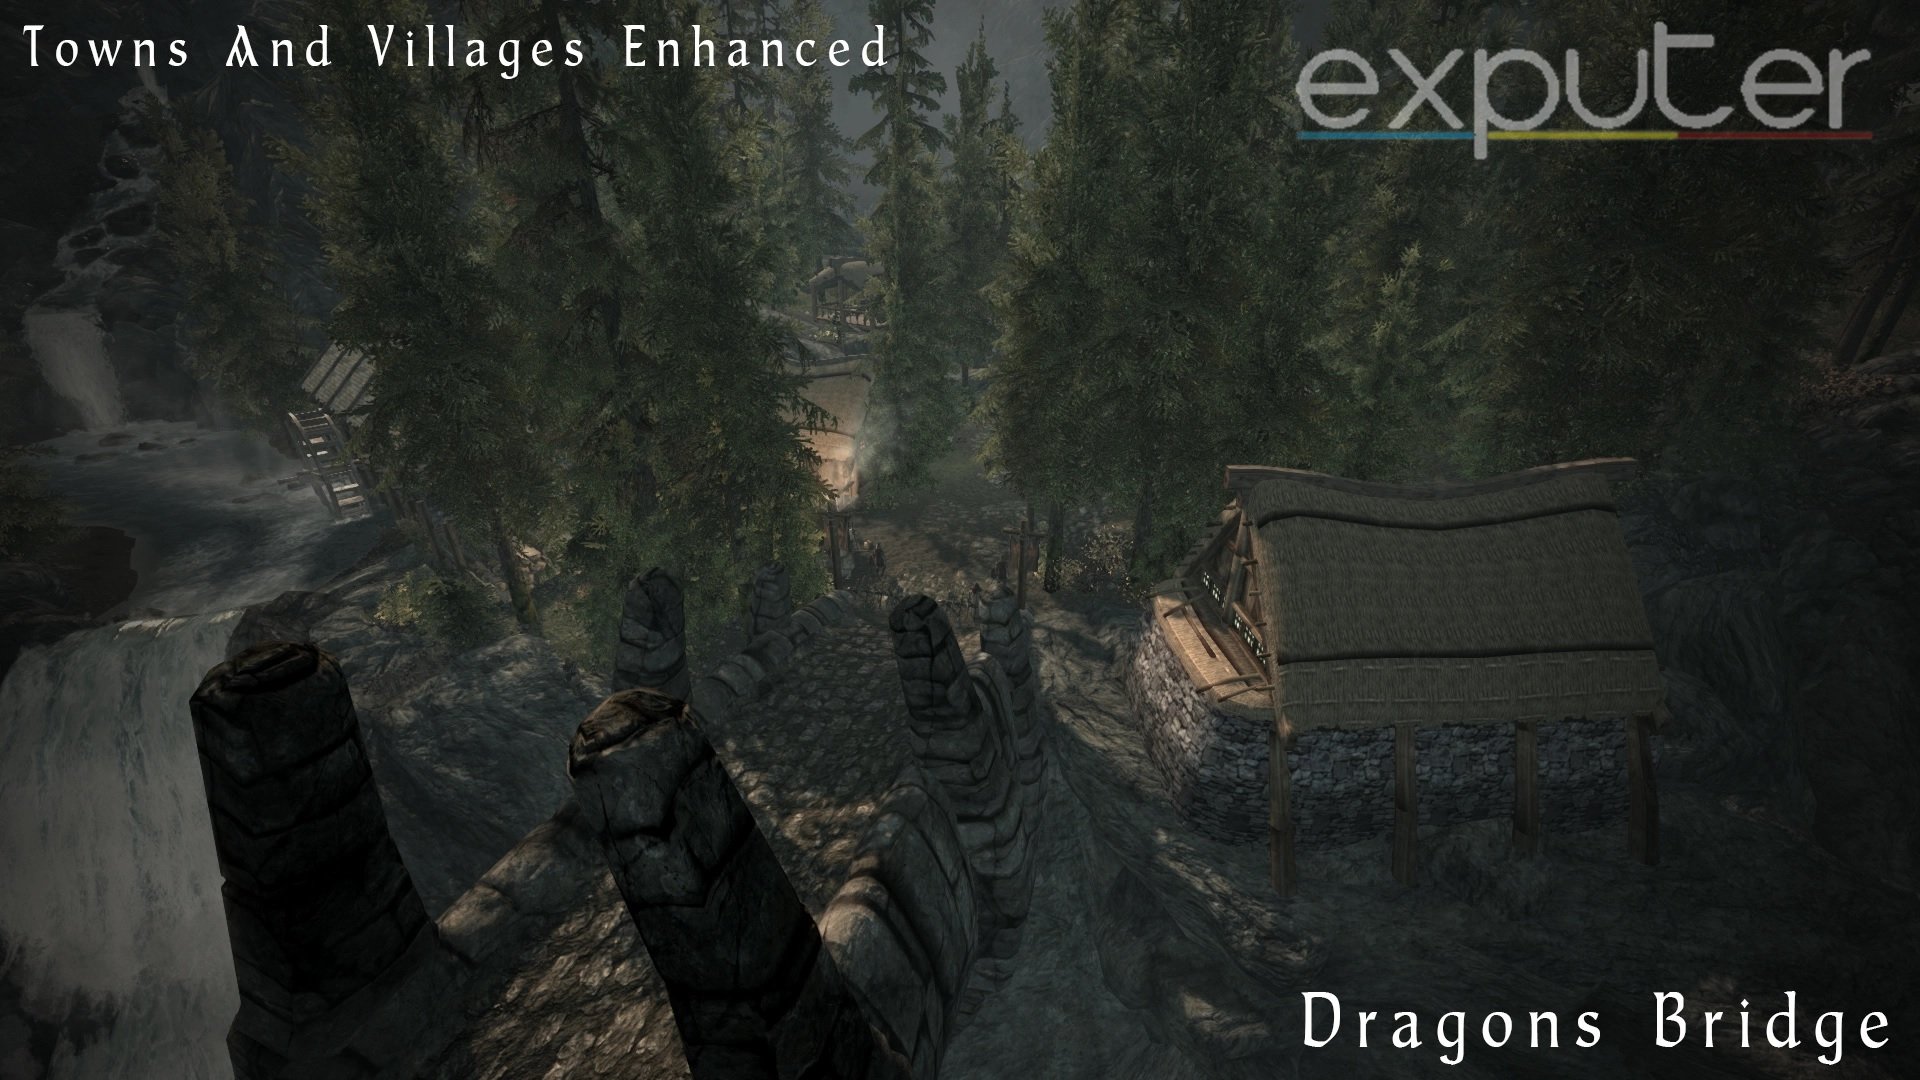 Towns And Villages Enhanced mod in Skyrim